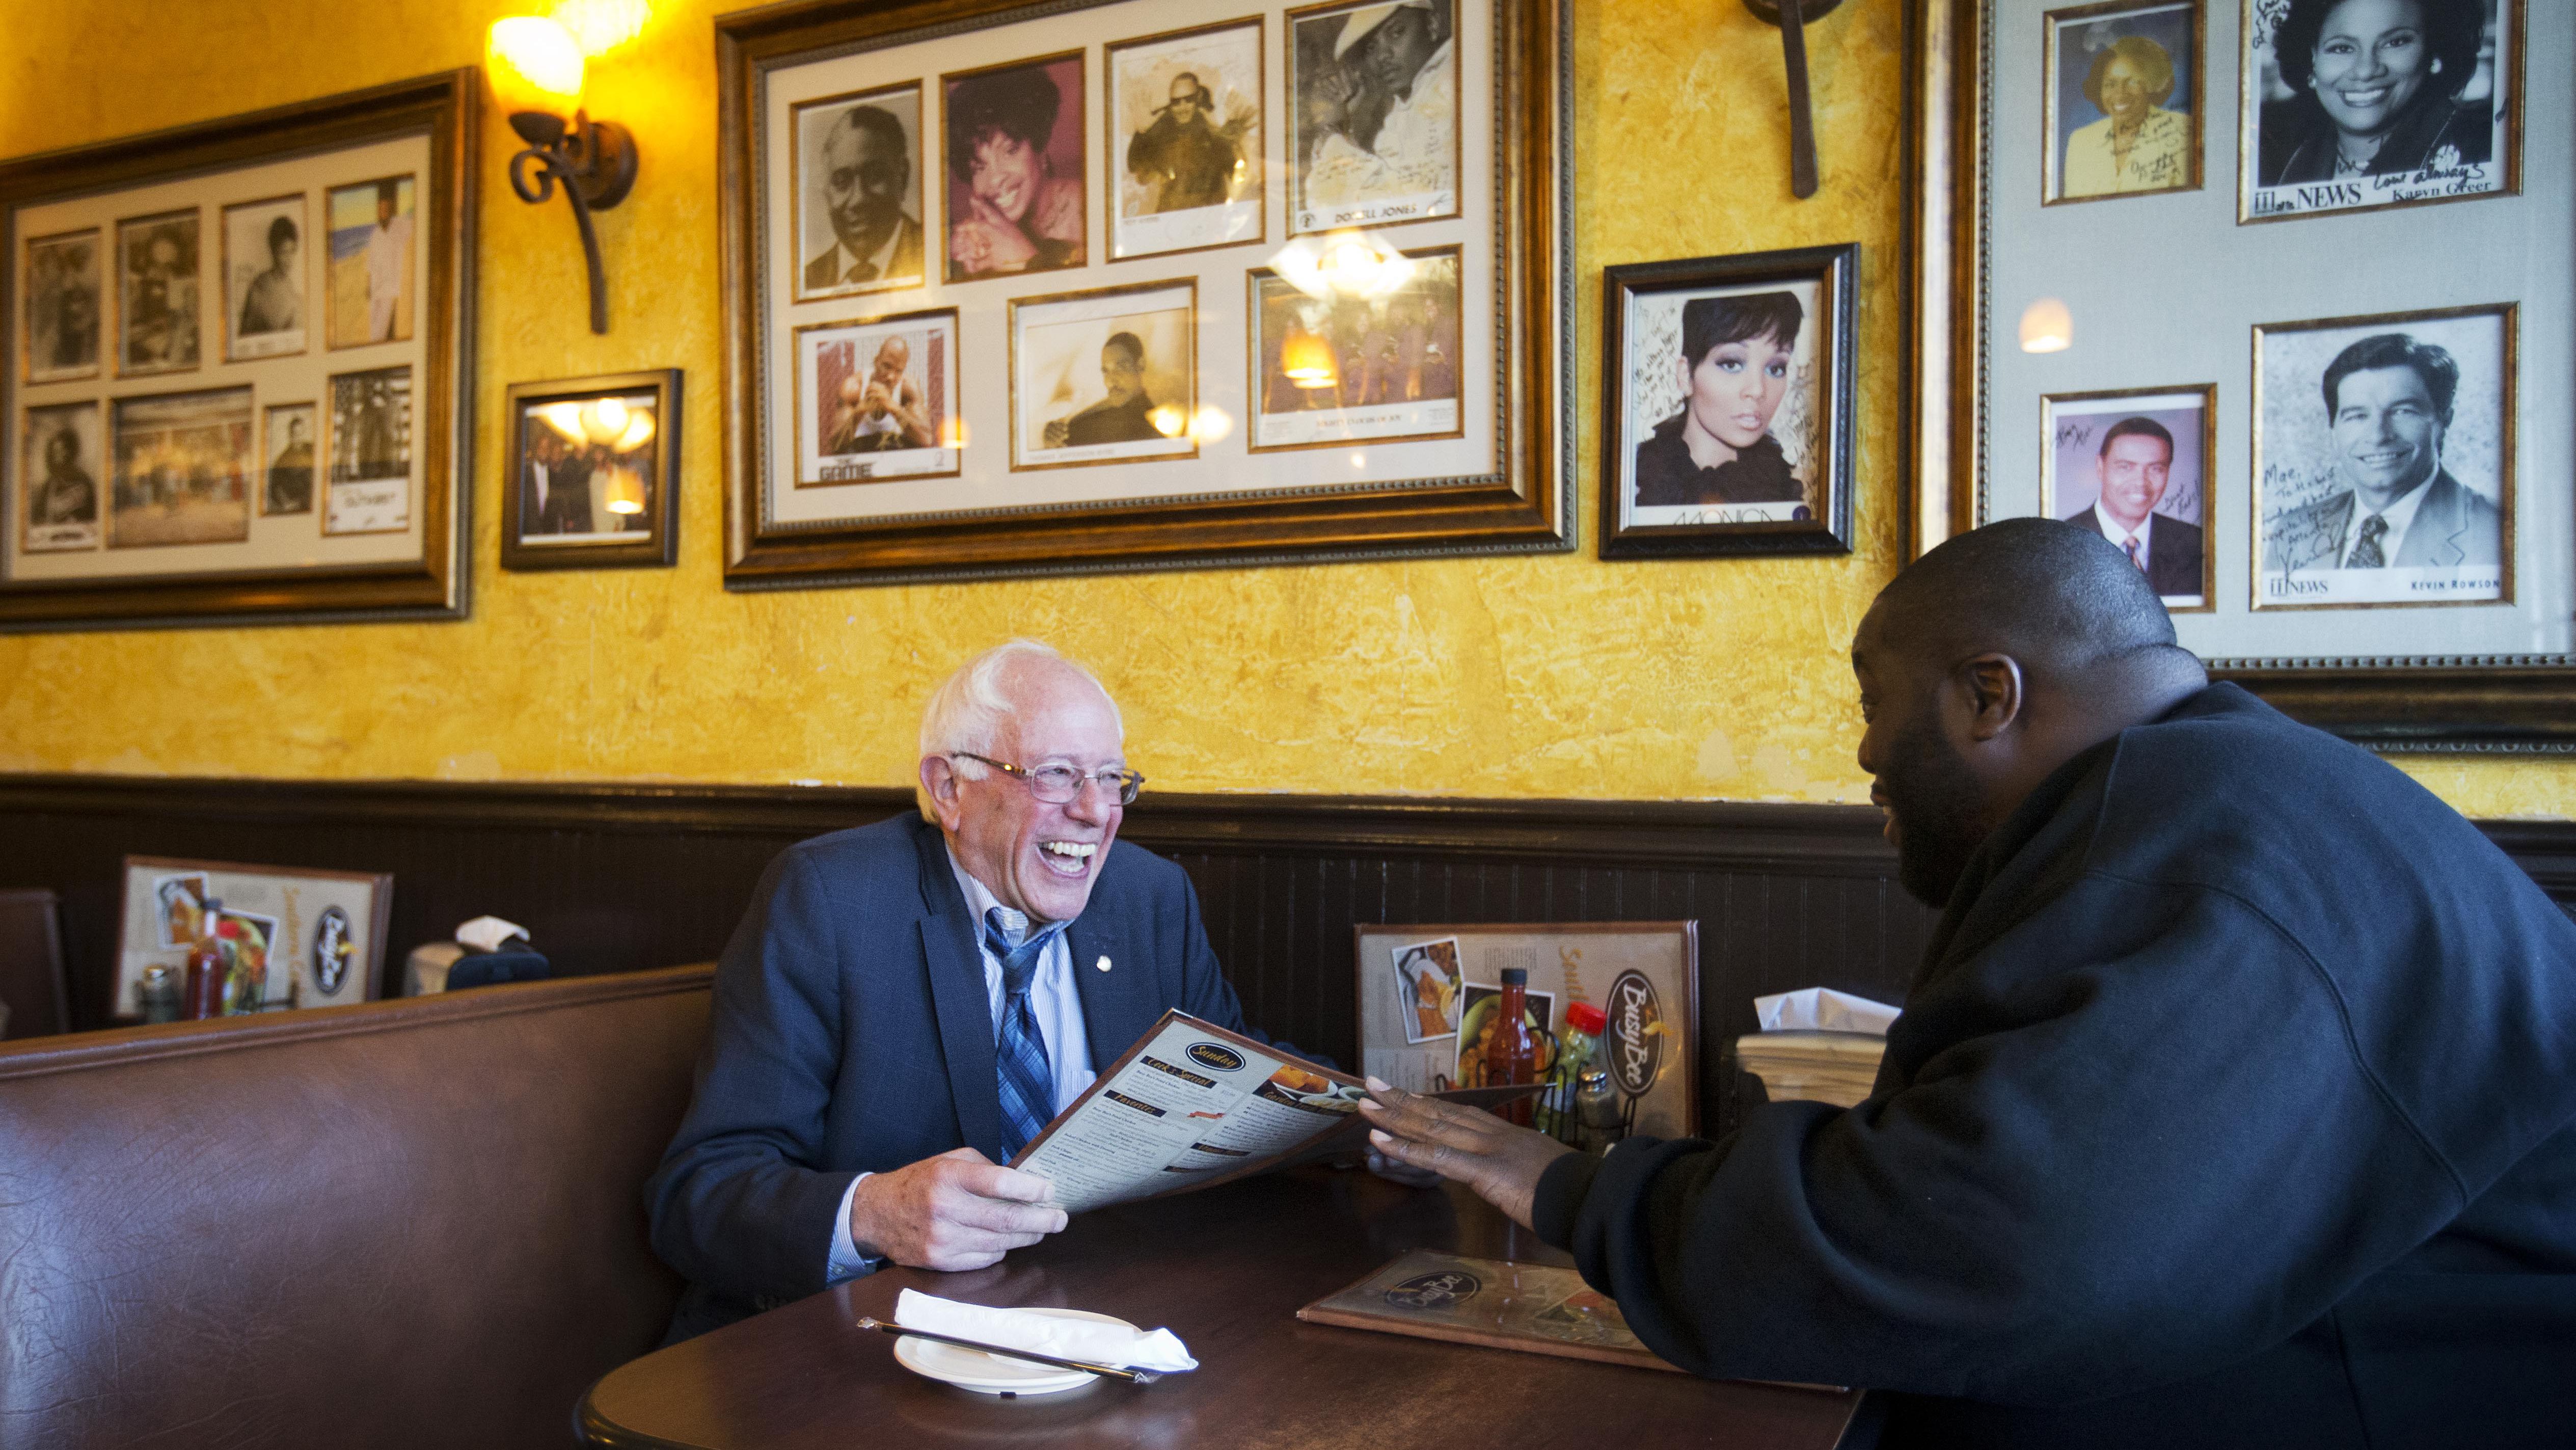 Sanders sits with rapper and activist Killer Mike at the Busy Bee Cafe in Atlanta in November 2015. That evening, Killer Mike <a href="http://www.cnn.com/2015/11/24/politics/bernie-sanders-killer-mike/index.html" target="_blank">introduced Sanders at a campaign event</a> in the city. "I'm talking about a revolutionary," the rapper told supporters. "In my heart of hearts, I truly believe that Sen. Bernie Sanders is the right man to lead this country."